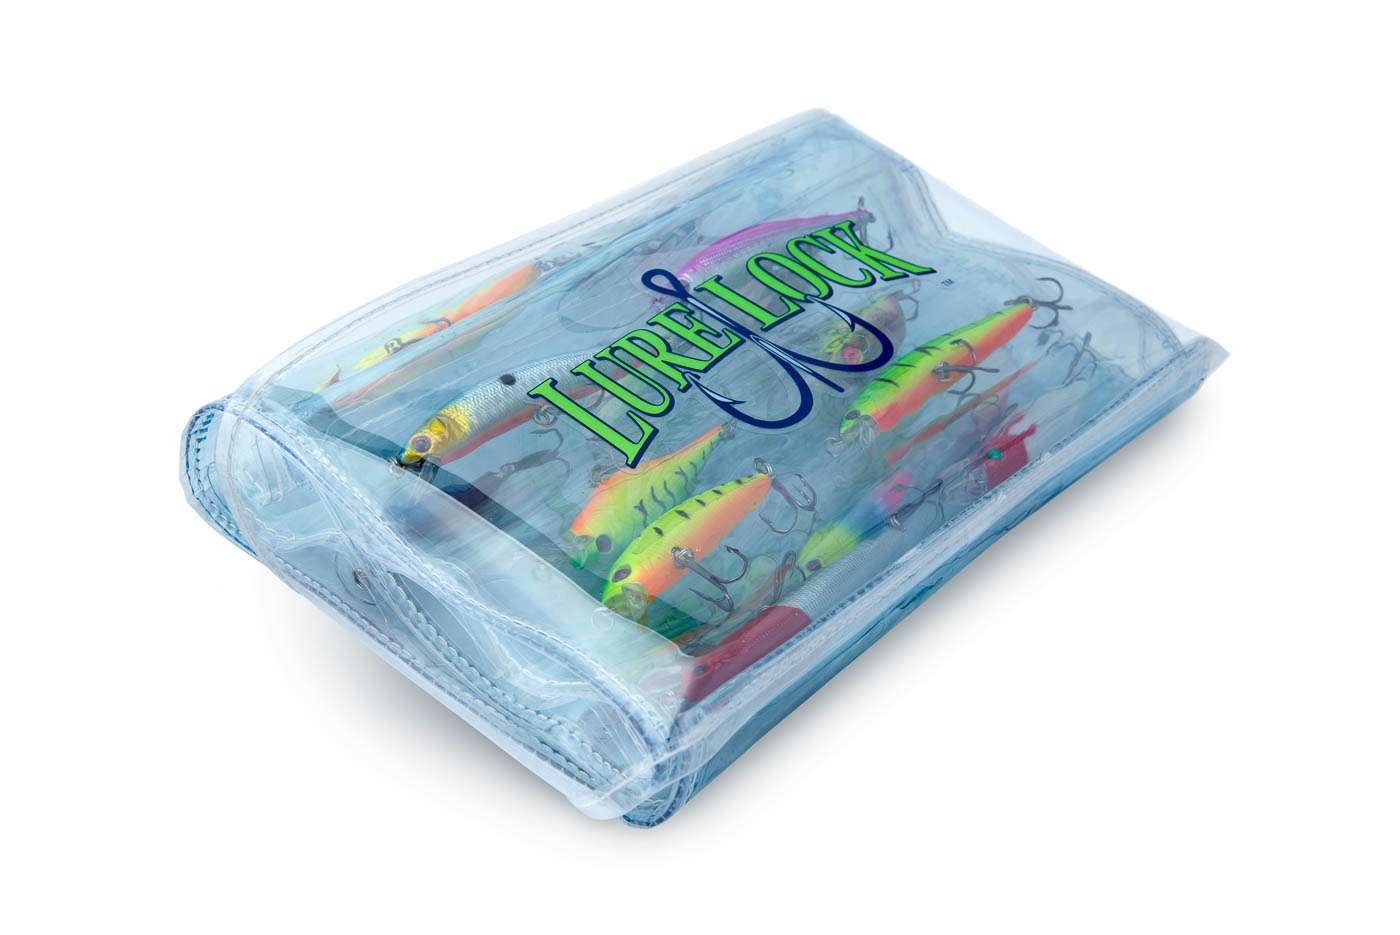 <p><strong>Lure Lock Roll-Up Bag</strong></p><p>Lure Lock, with its patented Tak Logic Gel technology, has introduced an entirely new, breakthrough means of storing lures, tools and other gear. Like the name implies, the Roll-Up system allows the user to roll it up while keeping the contents firmly secured and held in place with the Tak Logic Gel. No lost lures, tangles or mess. Store it vertically or any other direction for even more storage options. Dimensions: 28